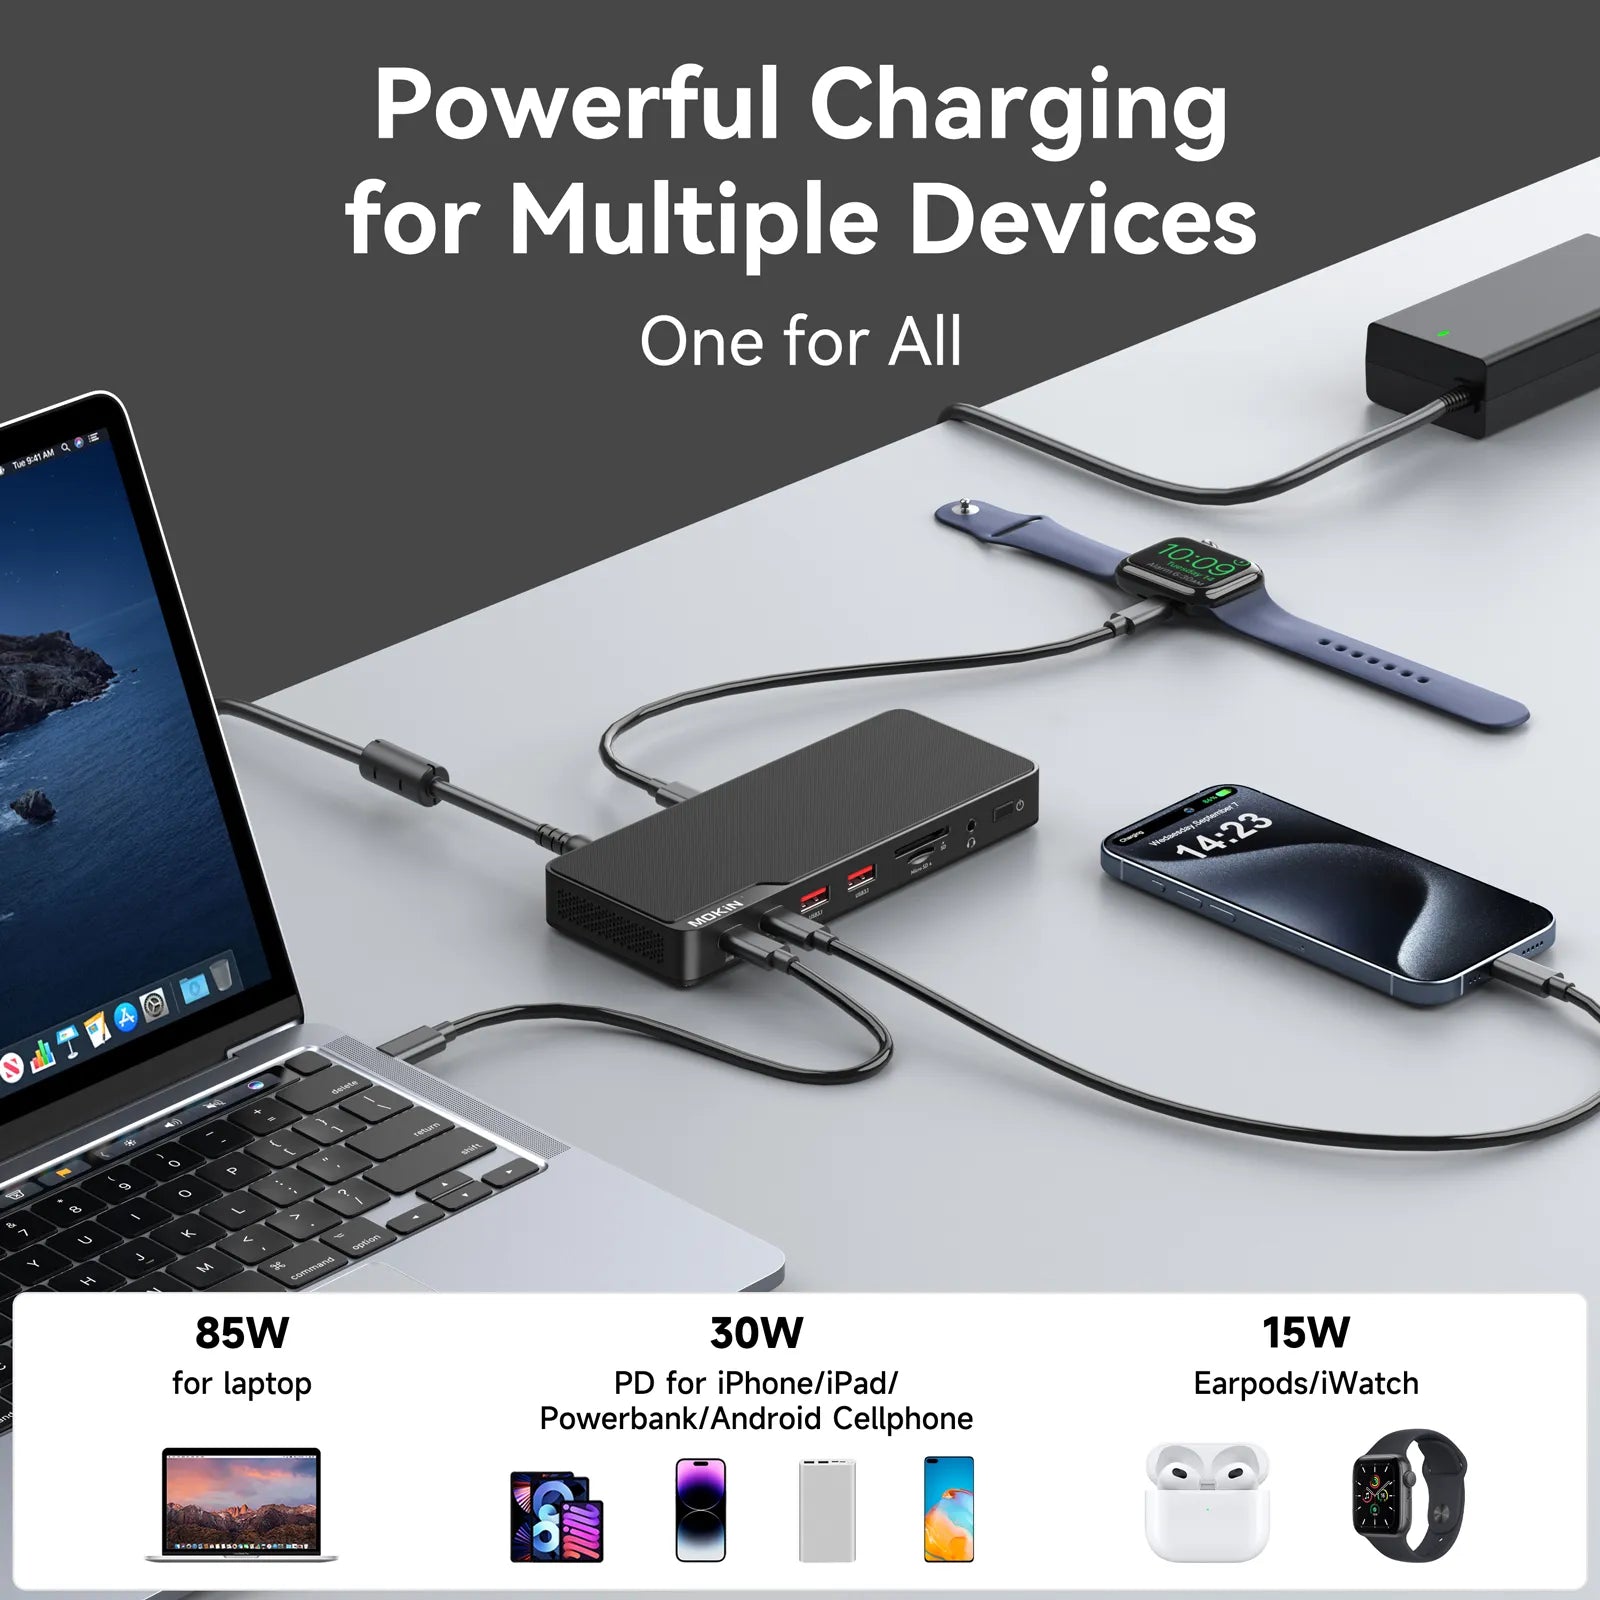 Thunderbolt 4 Powerful Charging for multiple devices